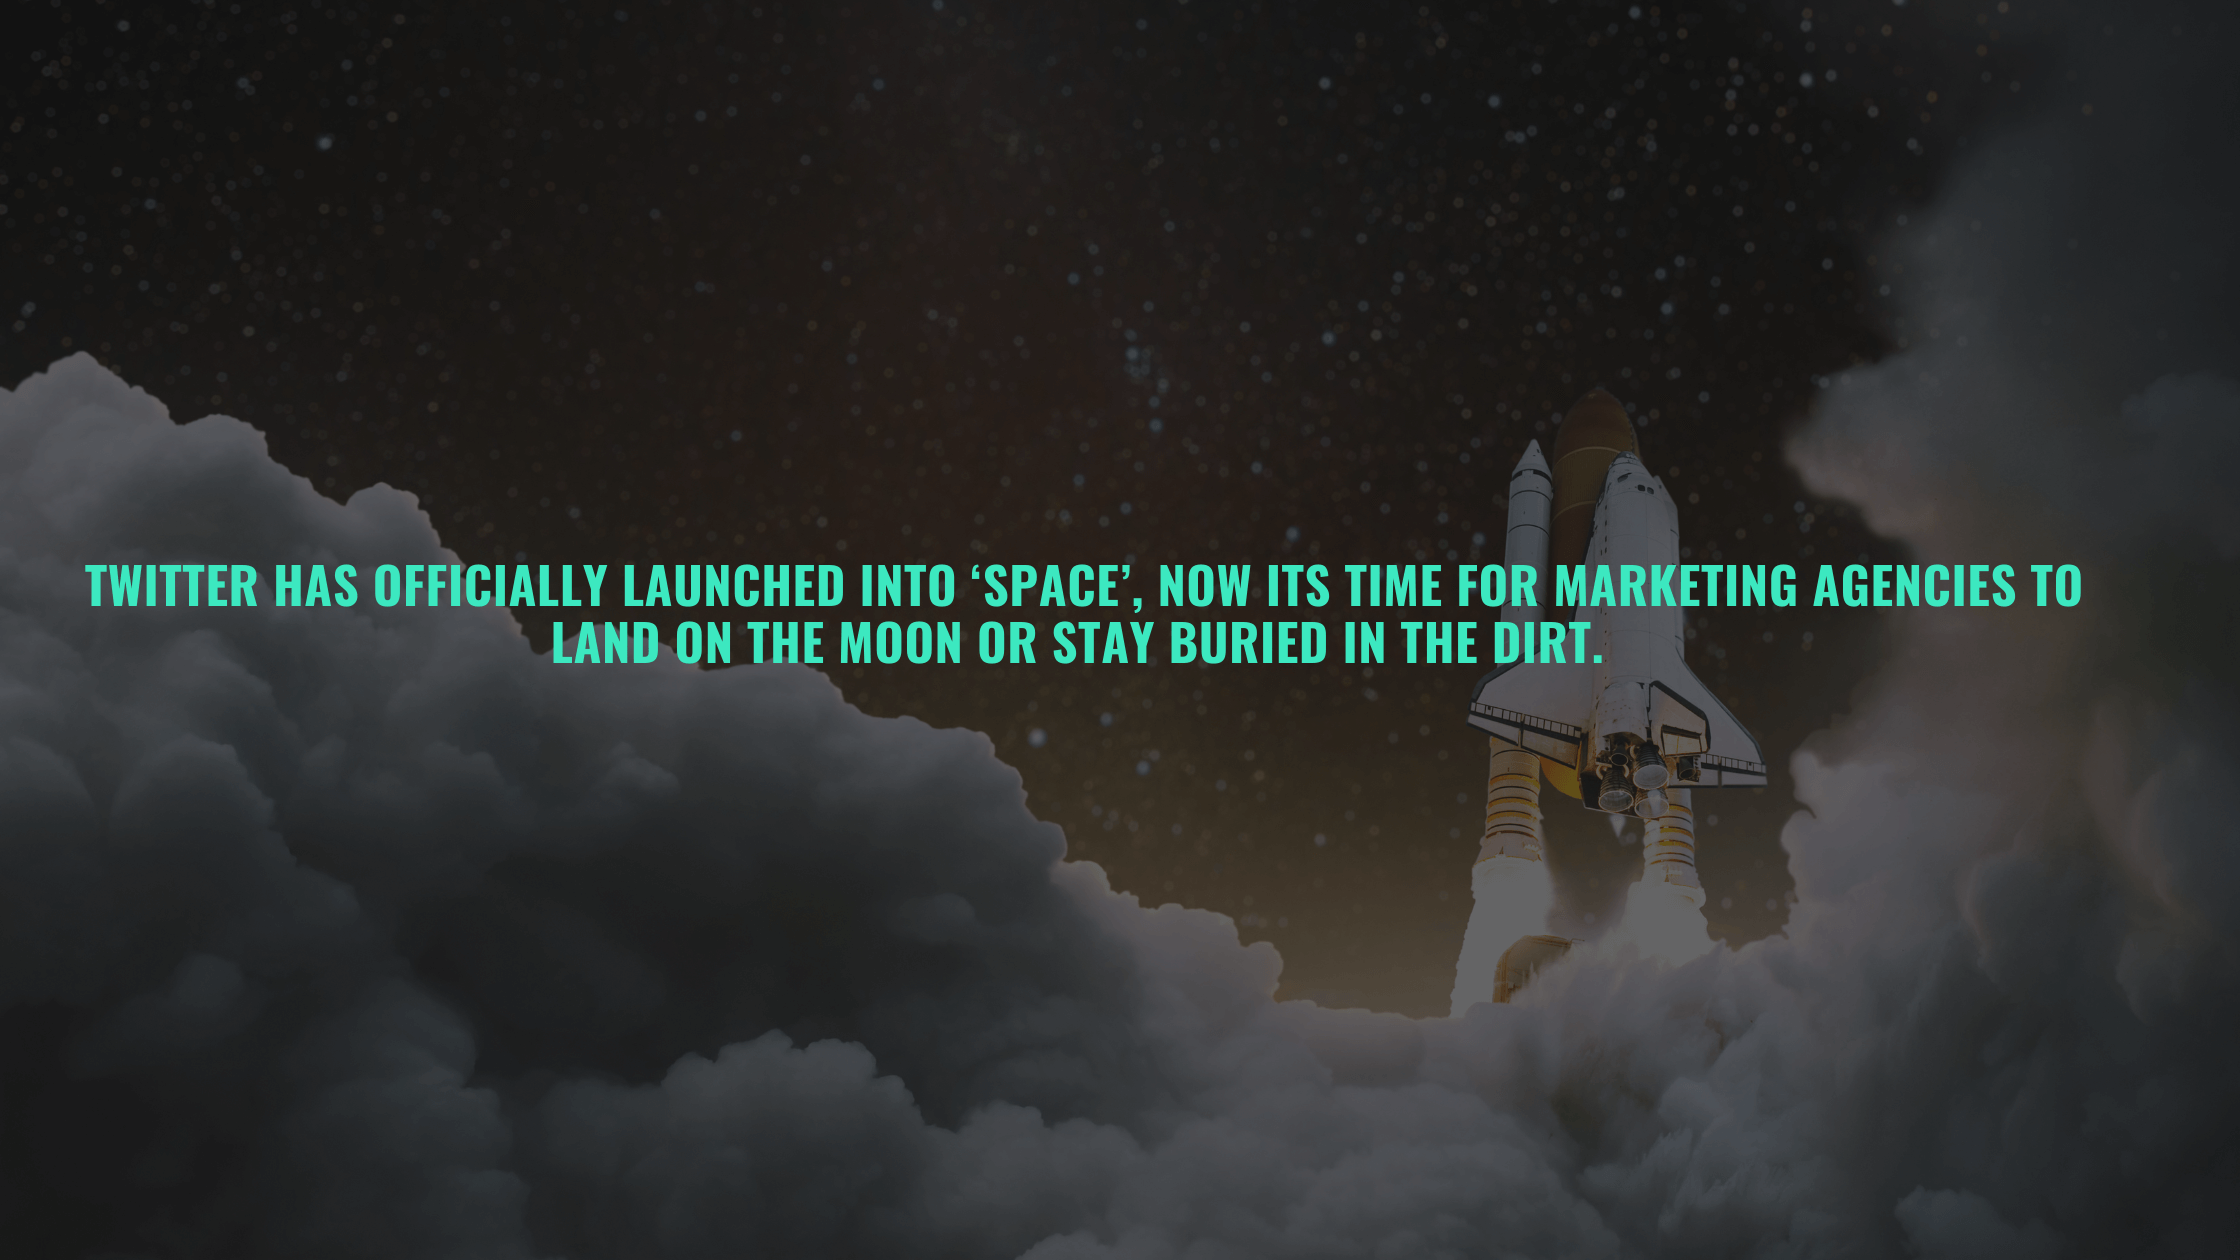 Twitter has officially launched into ‘space.’ Now it's time for marketing agencies to land on the moon or stay buried in the dirt. 